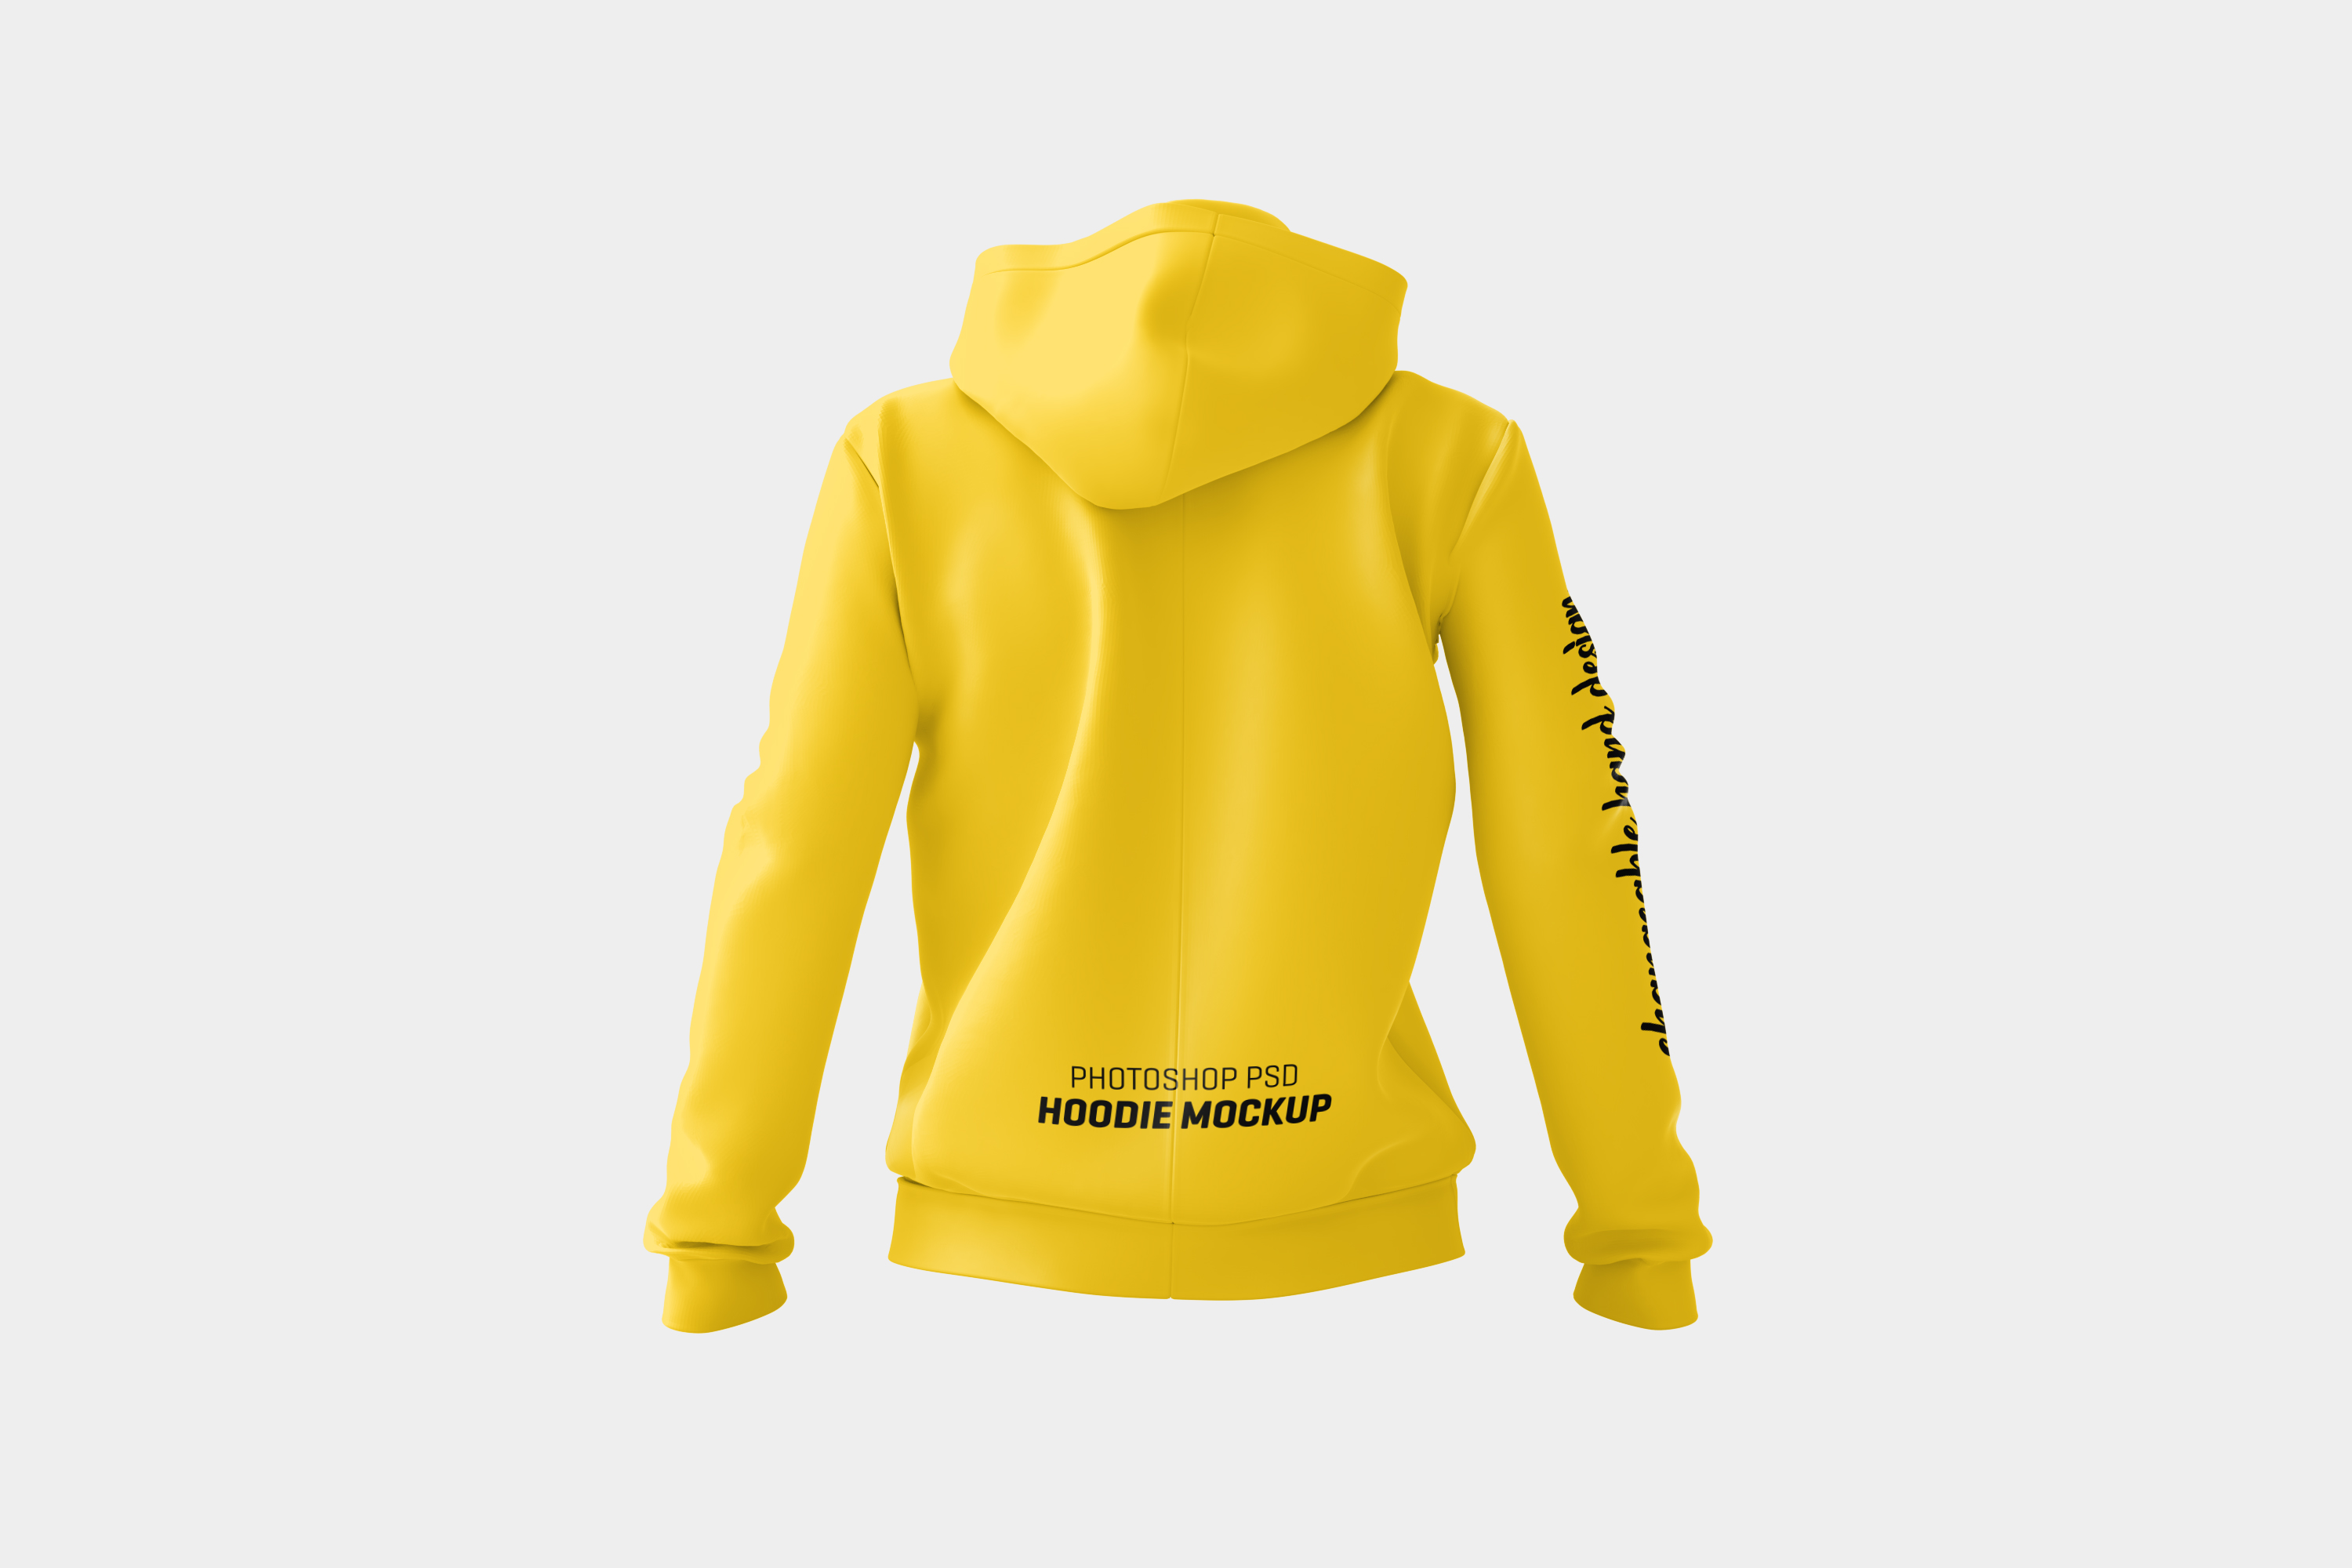 Download 938+ Women Hoodie Mockup Free Yellow Images Object Mockups